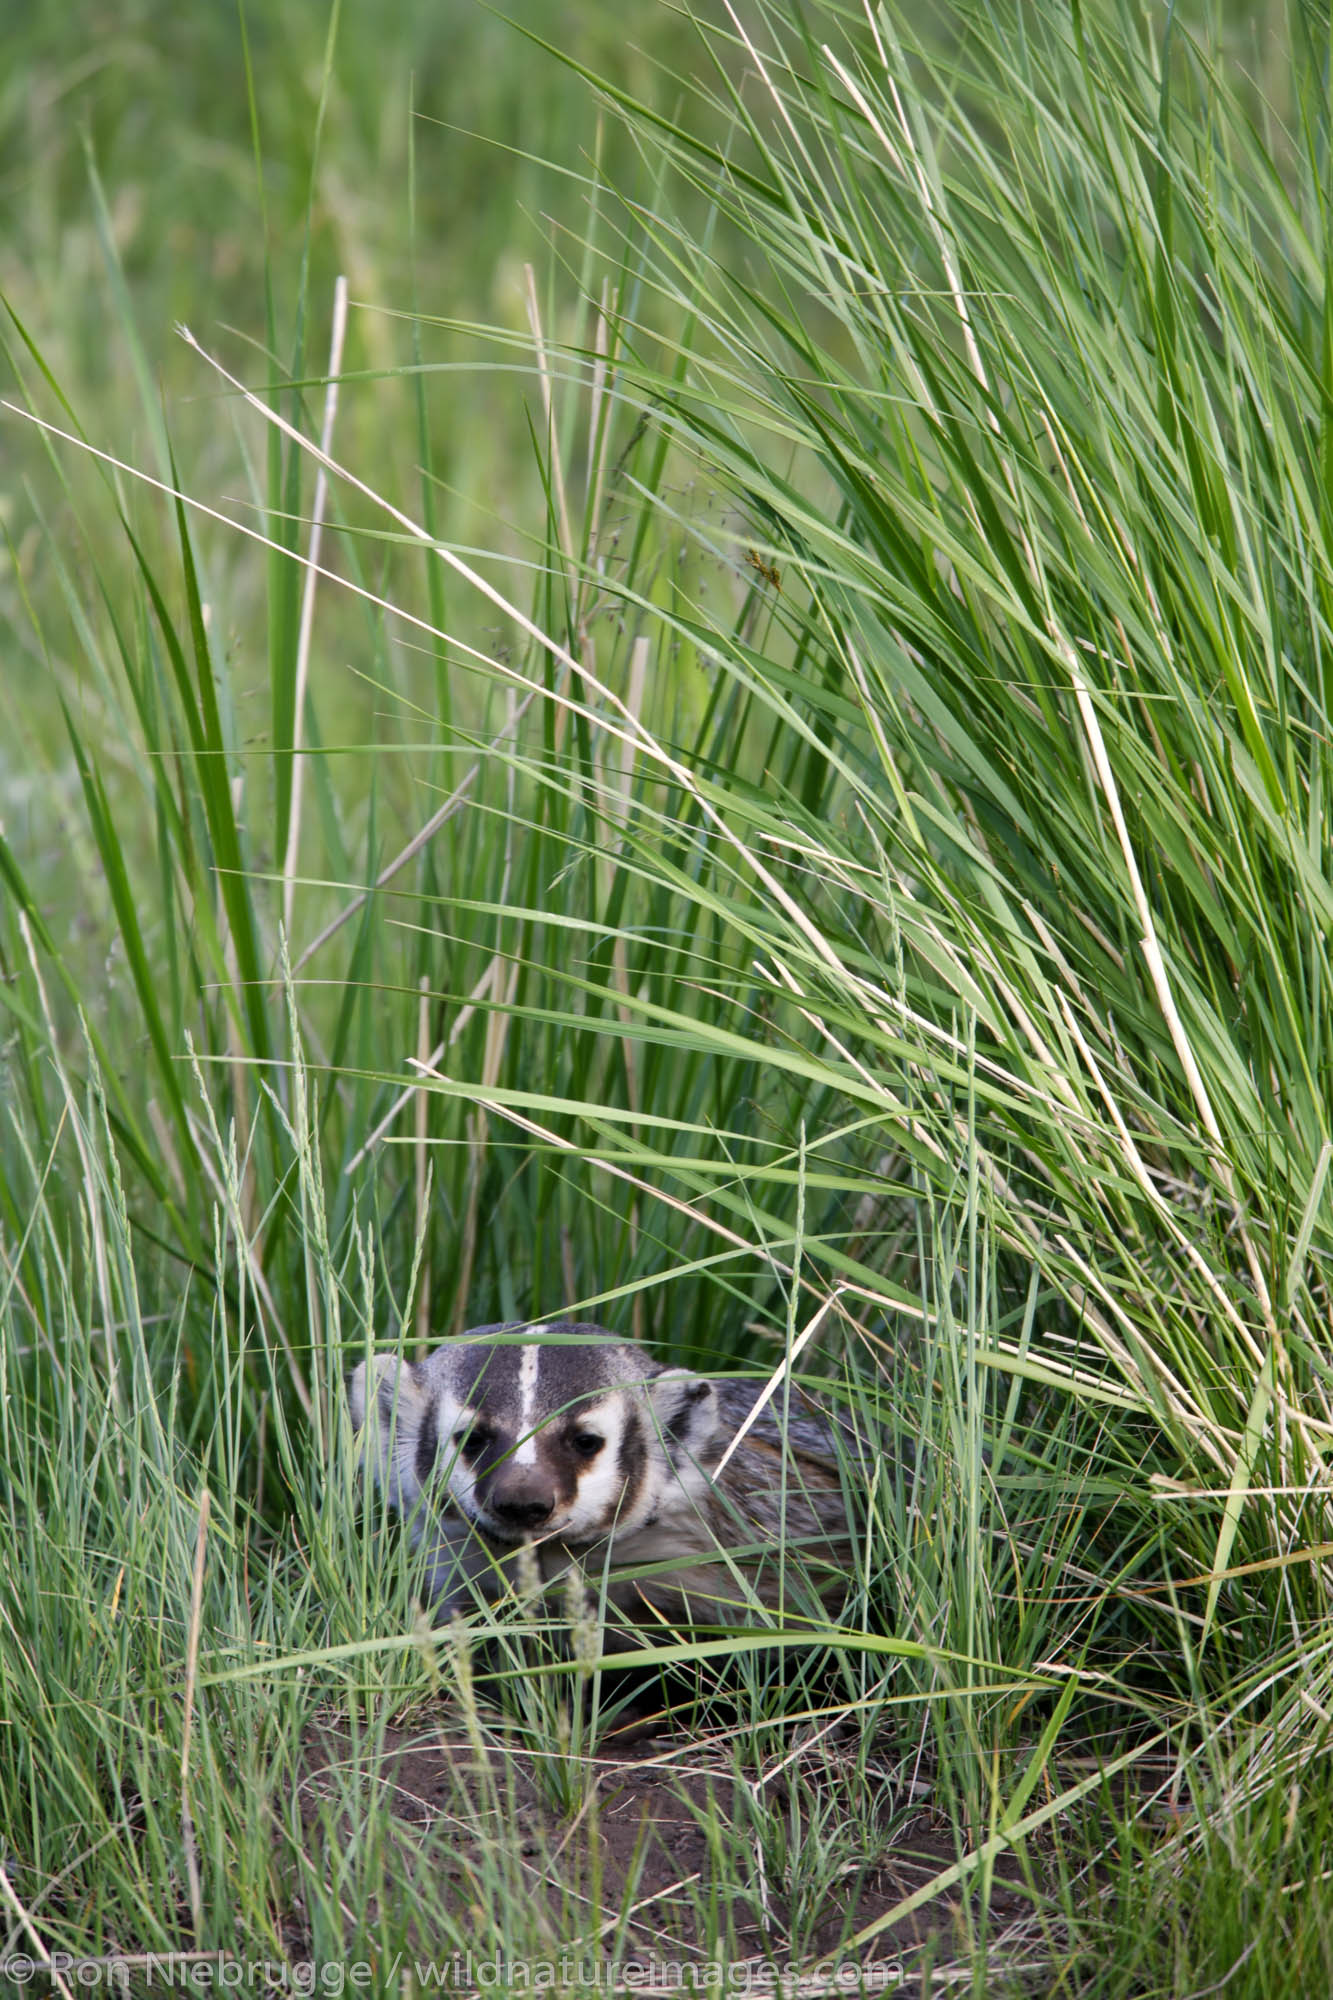 A Badger, Yellowstone National Park, Wyoming.